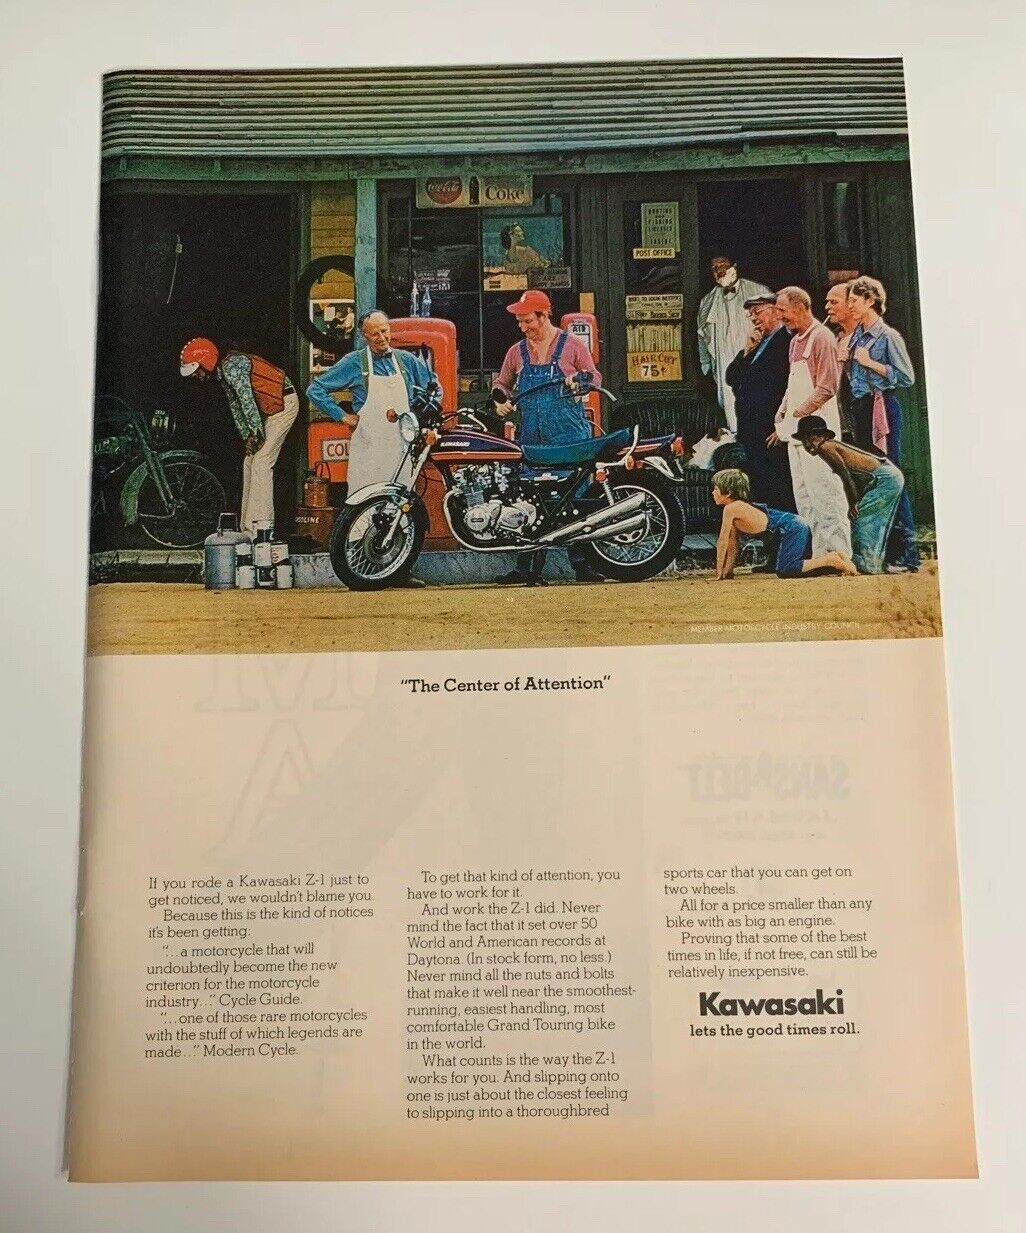 1974 Kawasaki Z-1 Motorcycle Center Of Attention Print Ad Advertising Vintage